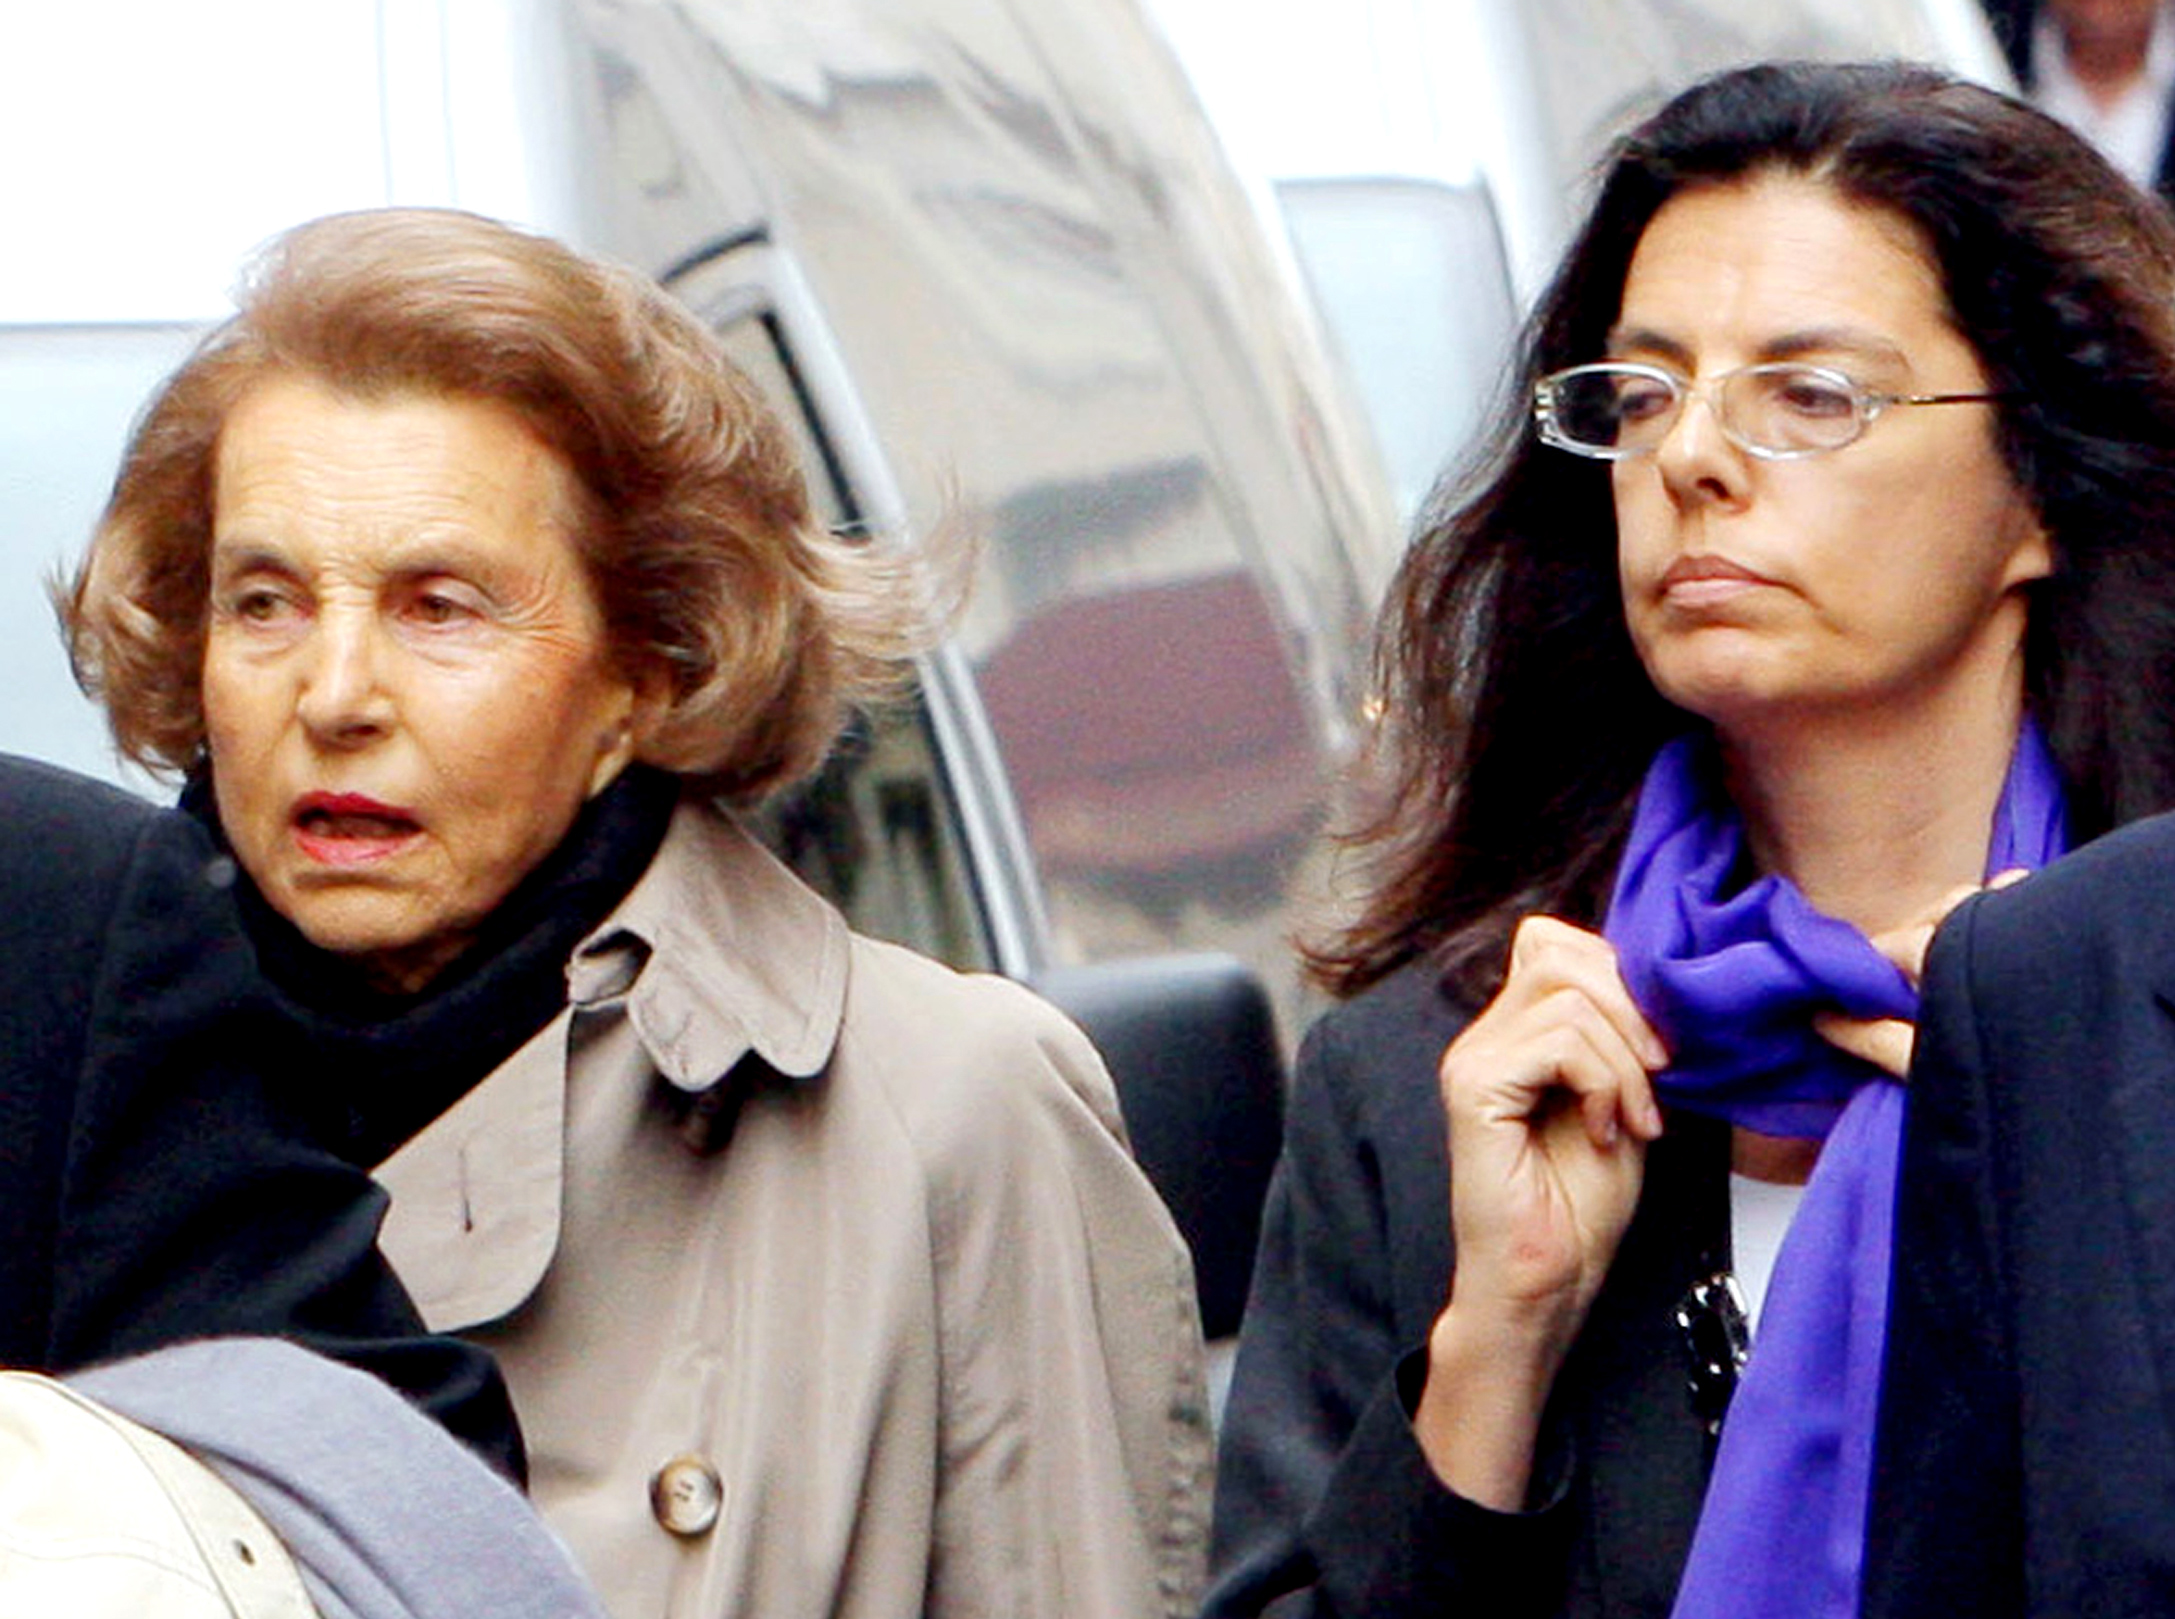 Lilian Bettencourt and Françoise Bettencourt Meyers spotted in Paris, France on July 6, 2007 | Source: Getty Images